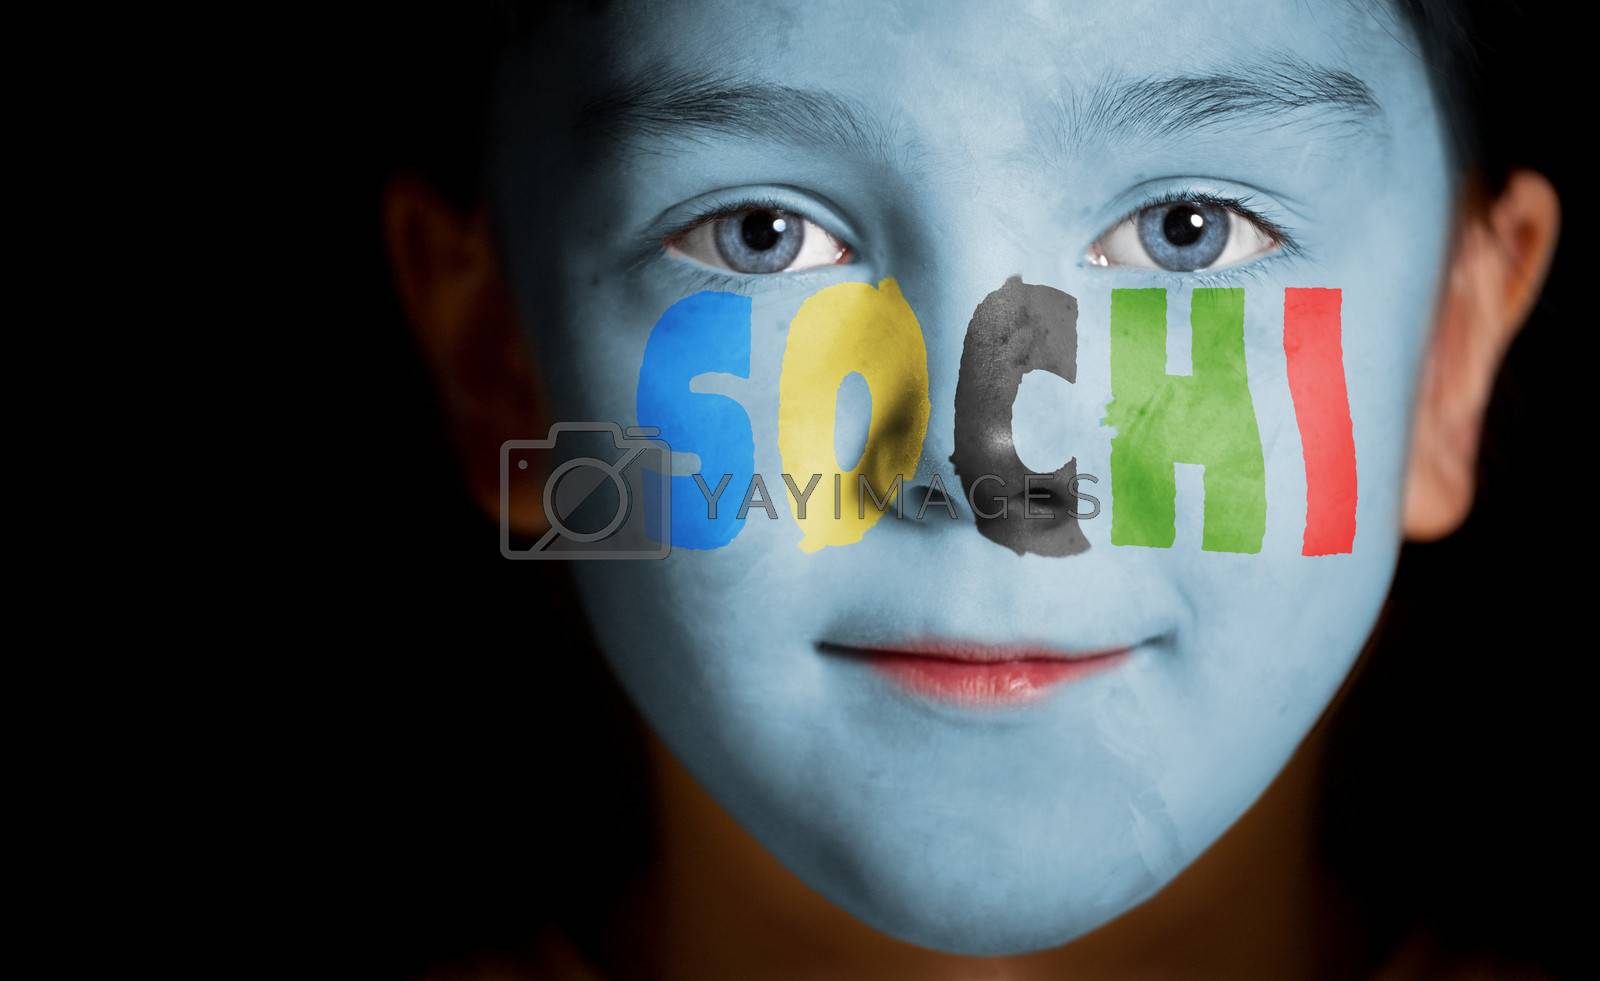 Royalty free image of Child face with painted text Sochi by TpaBMa